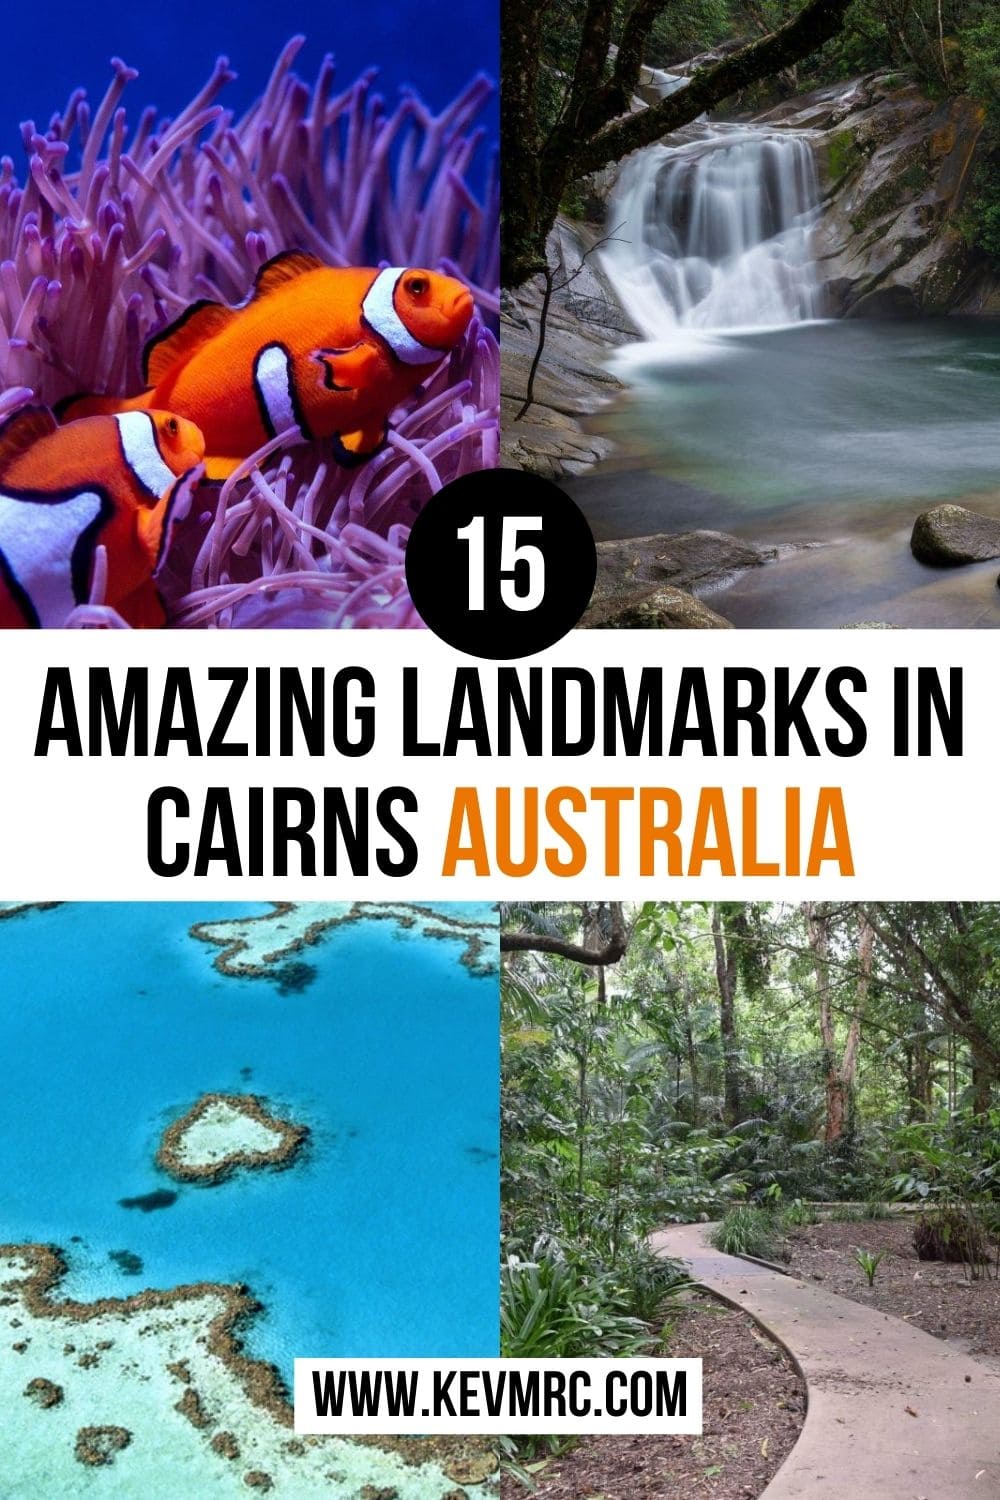 Cairns in Australia is mostly known for being the ideal starting point to discover the Great Barrier Reef. But Cairns and its region have much more to offer. Here are 15 famous landmarks in Cairns. cairns queensland things to do | things to do in cairns australia | cairns australia great barrier reef | what to do in cairns australia | free things to do in cairns australia | best things to do in cairns | top things to do in cairns